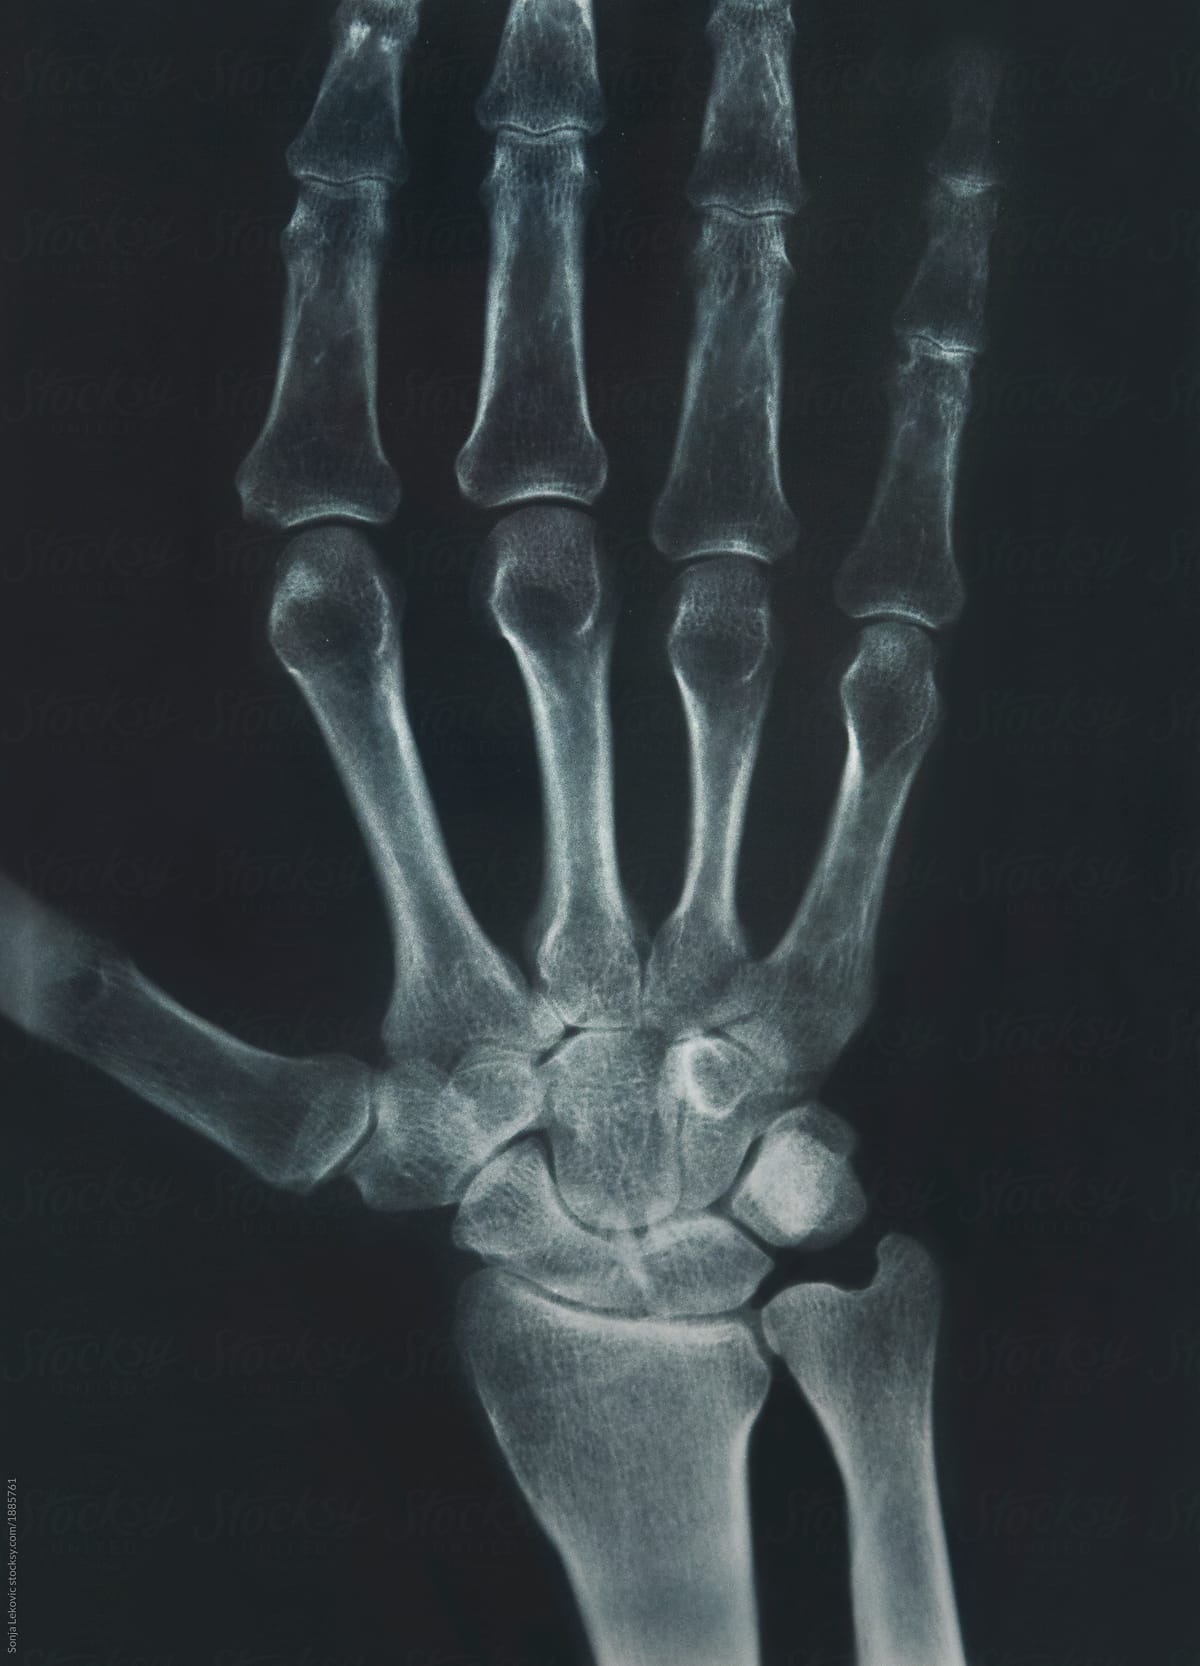 x-ray of the hand